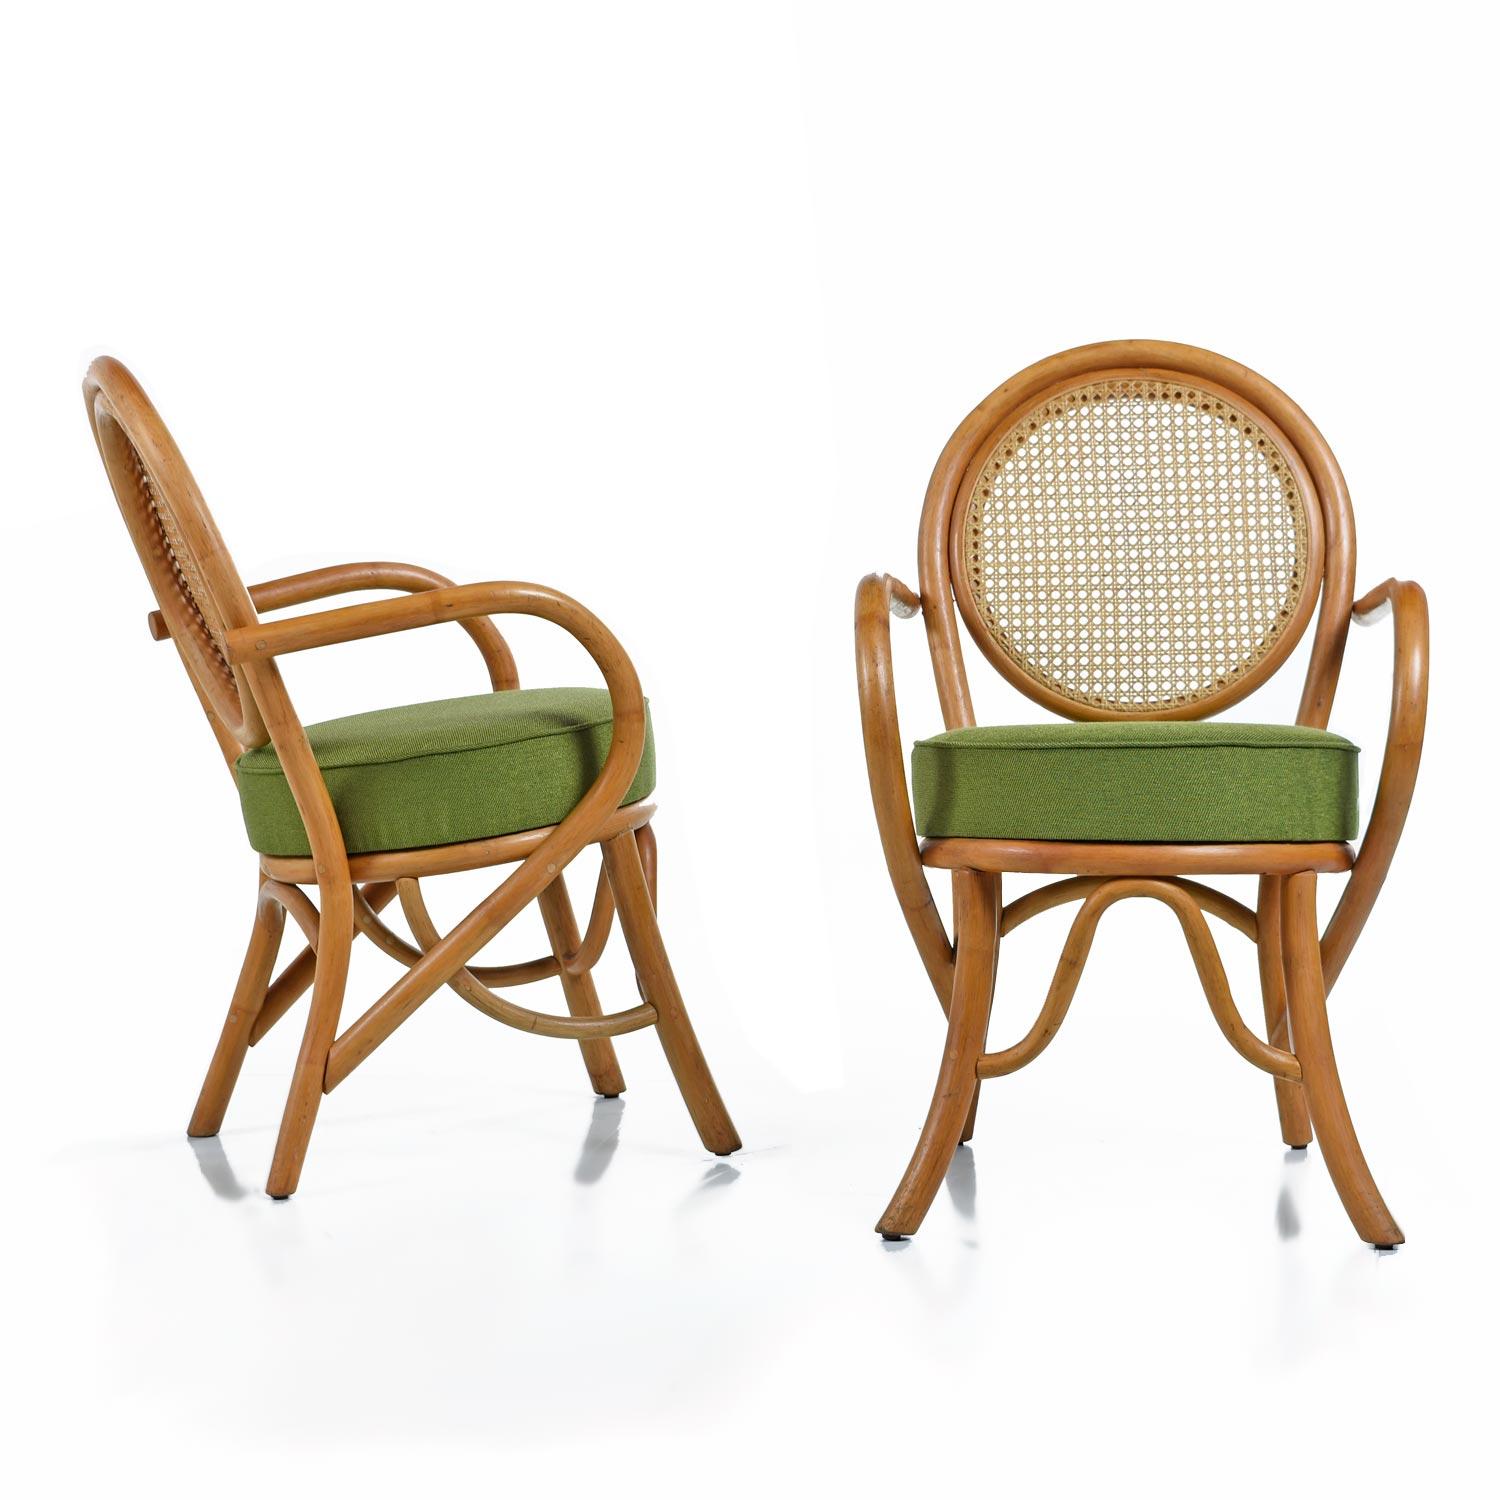 These pretty and practical Paul Frankl style chairs were designed for versatility. Expertly crafted and sculpted rattan. A Classic set of eastern influenced American modern and Art Deco design. Unique styles working in symbiosis.

The seat bottoms